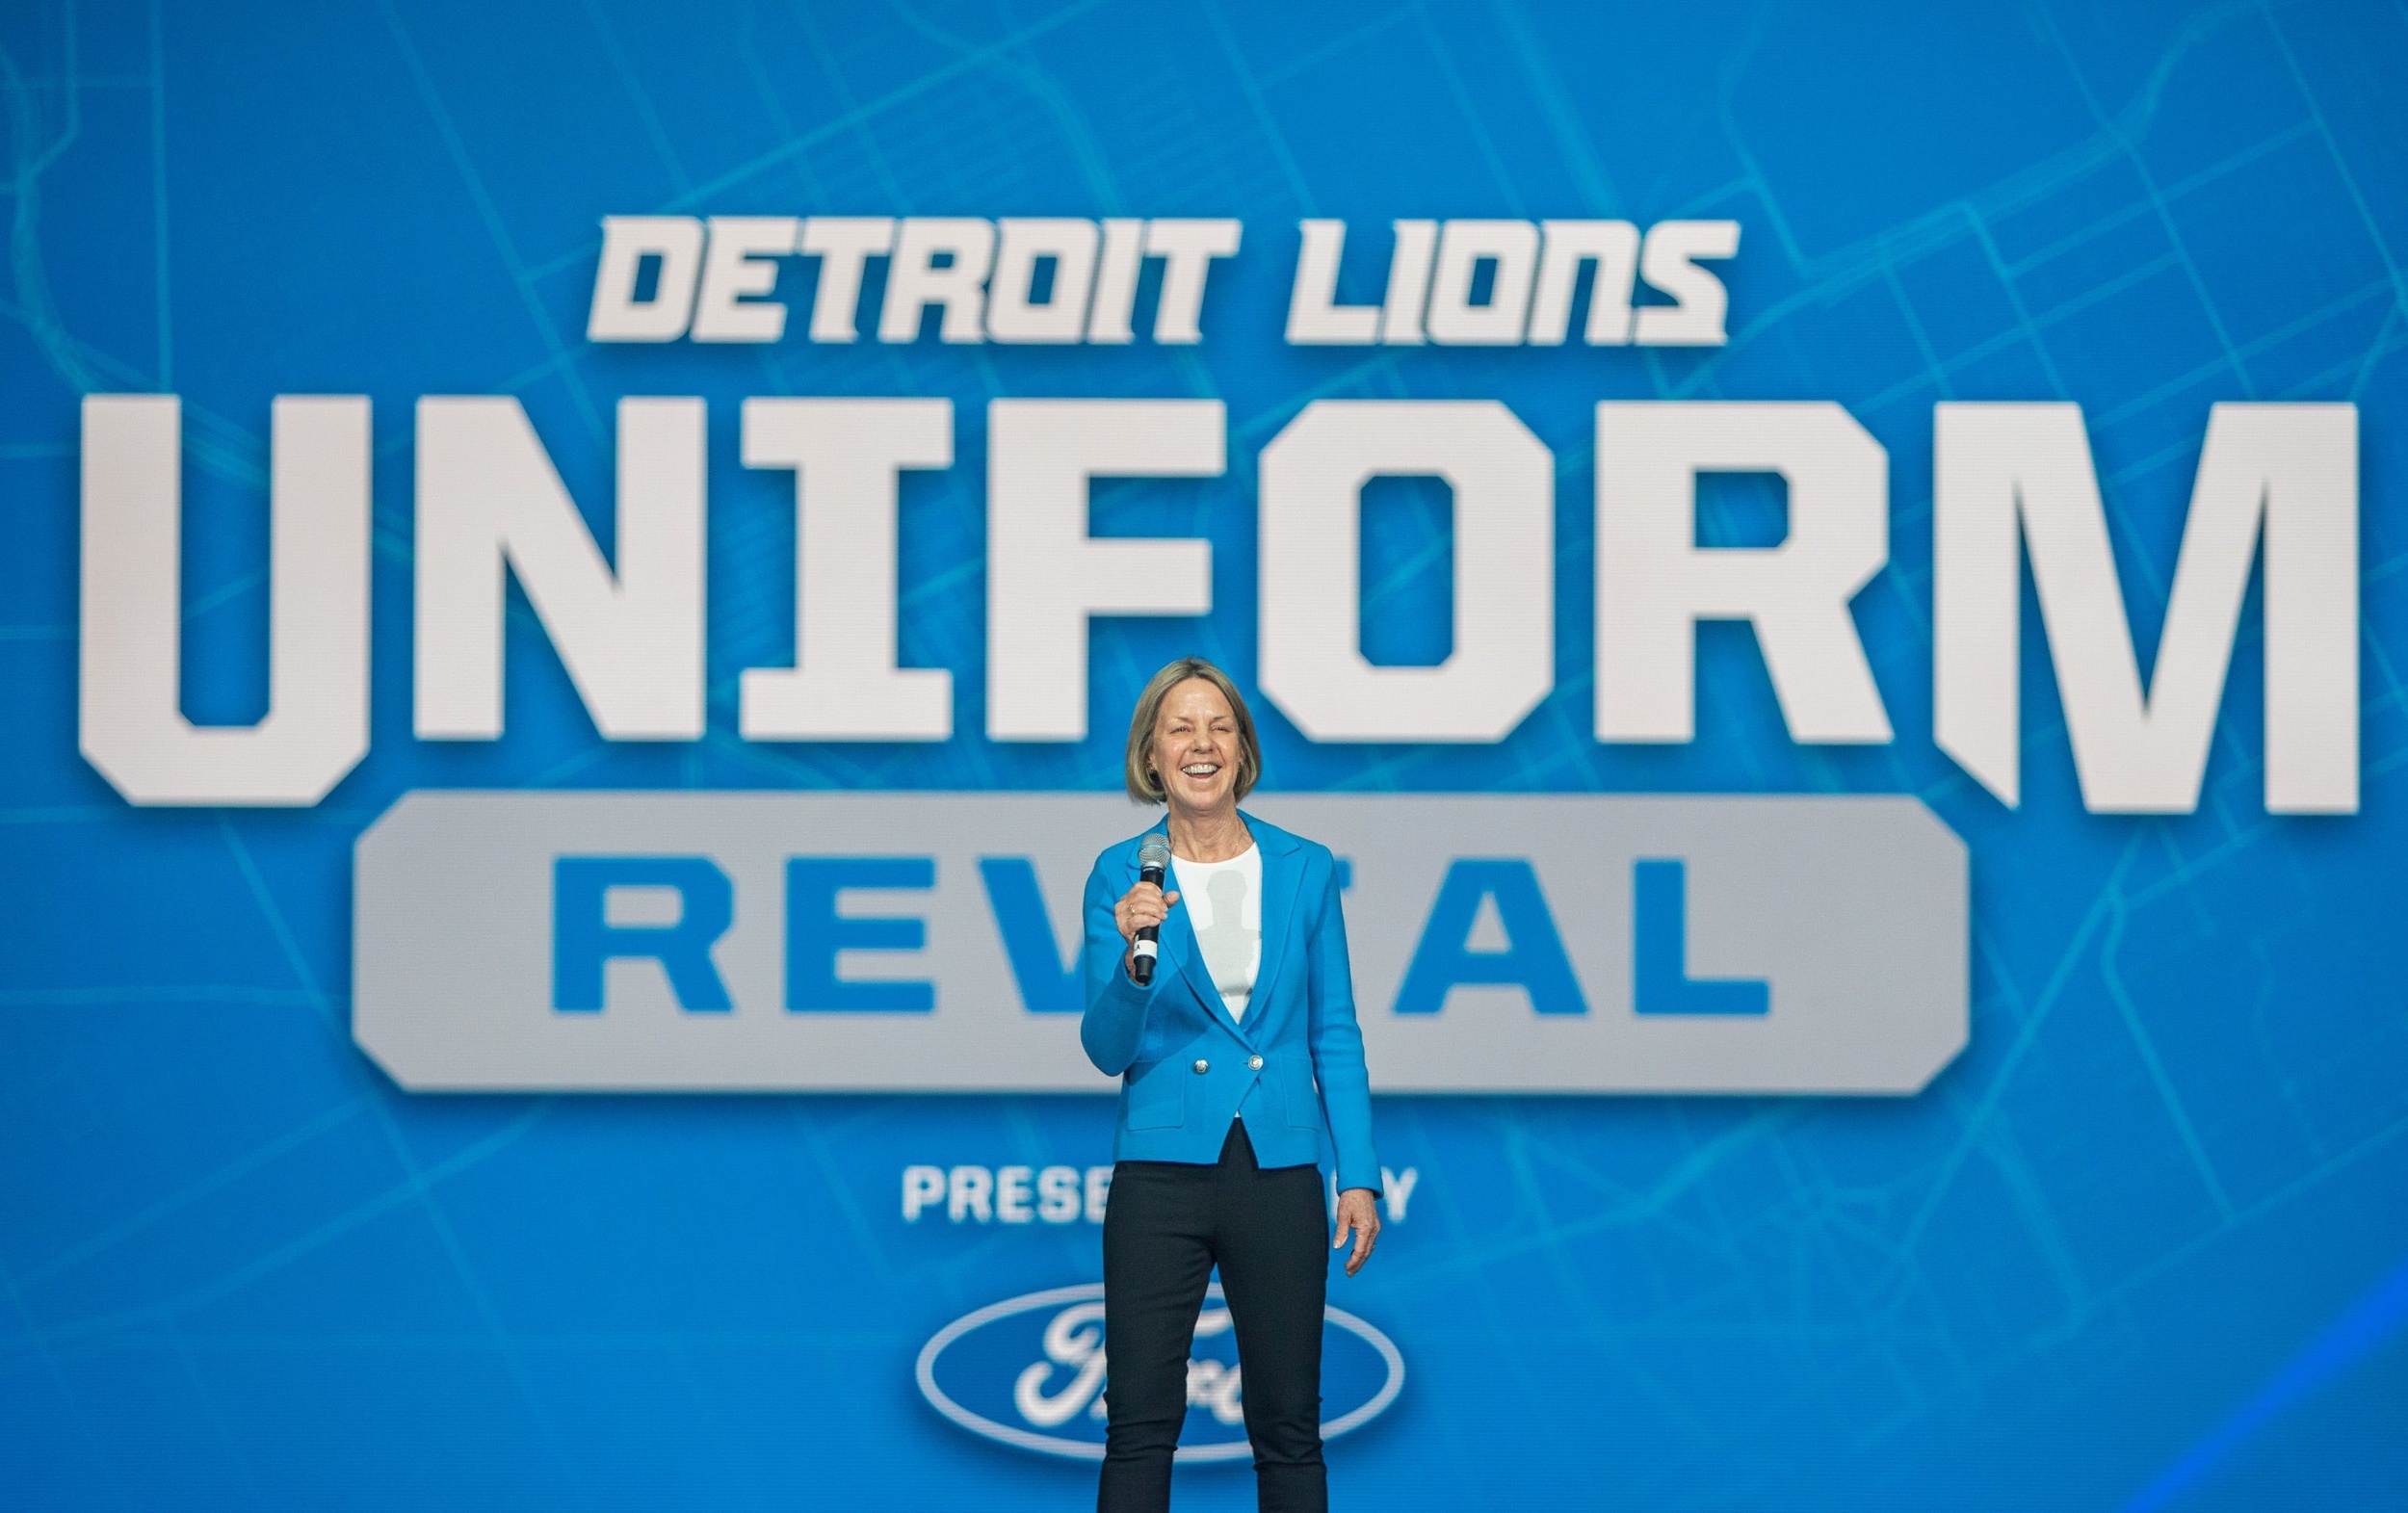 lions officially unveil new uniforms